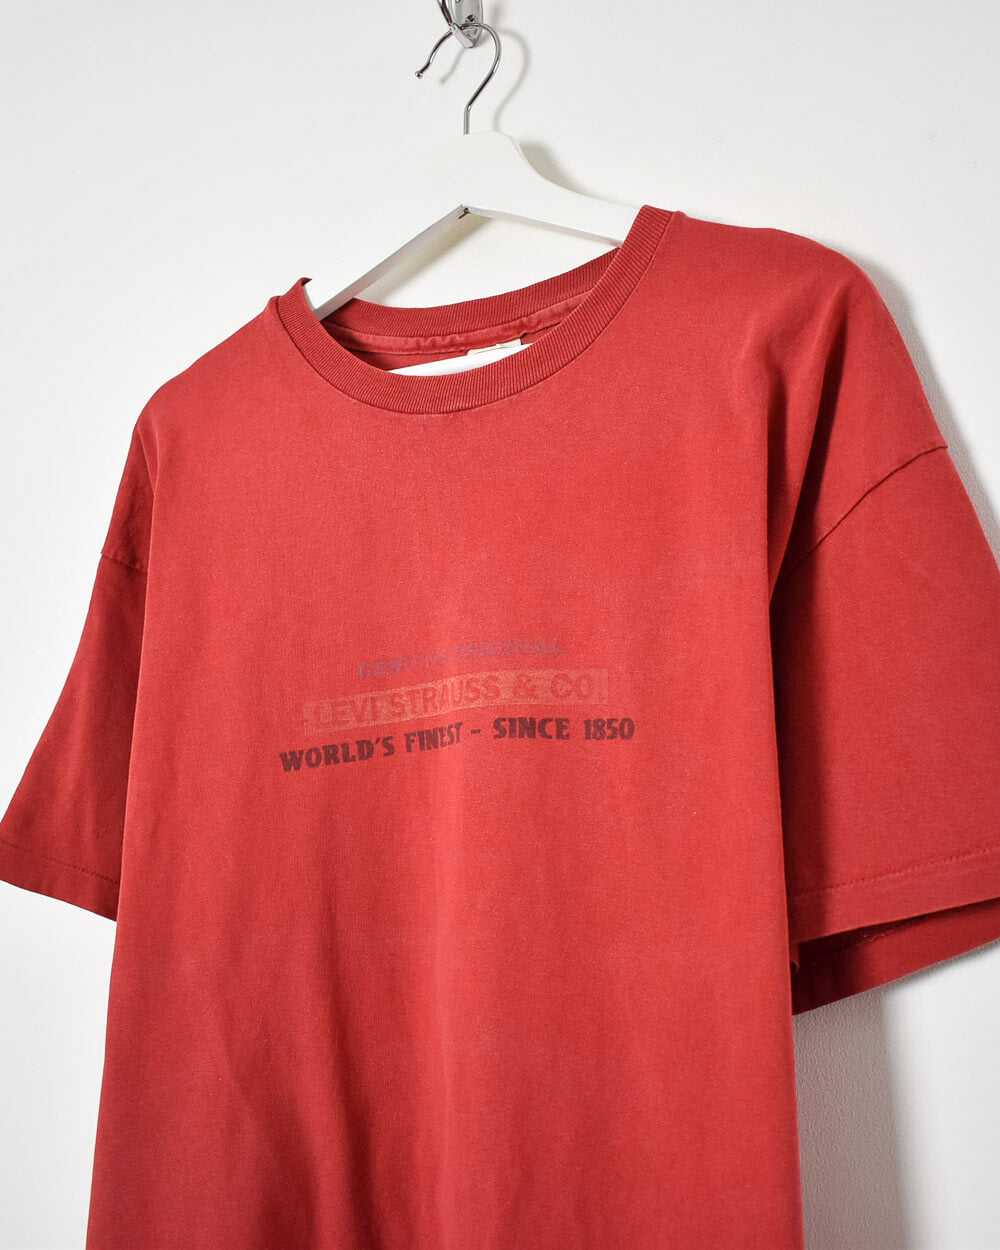 Levi Strauss & Co. World's Finest Since 1850 T-Shirt - Large - Domno Vintage 90s, 80s, 00s Retro and Vintage Clothing 